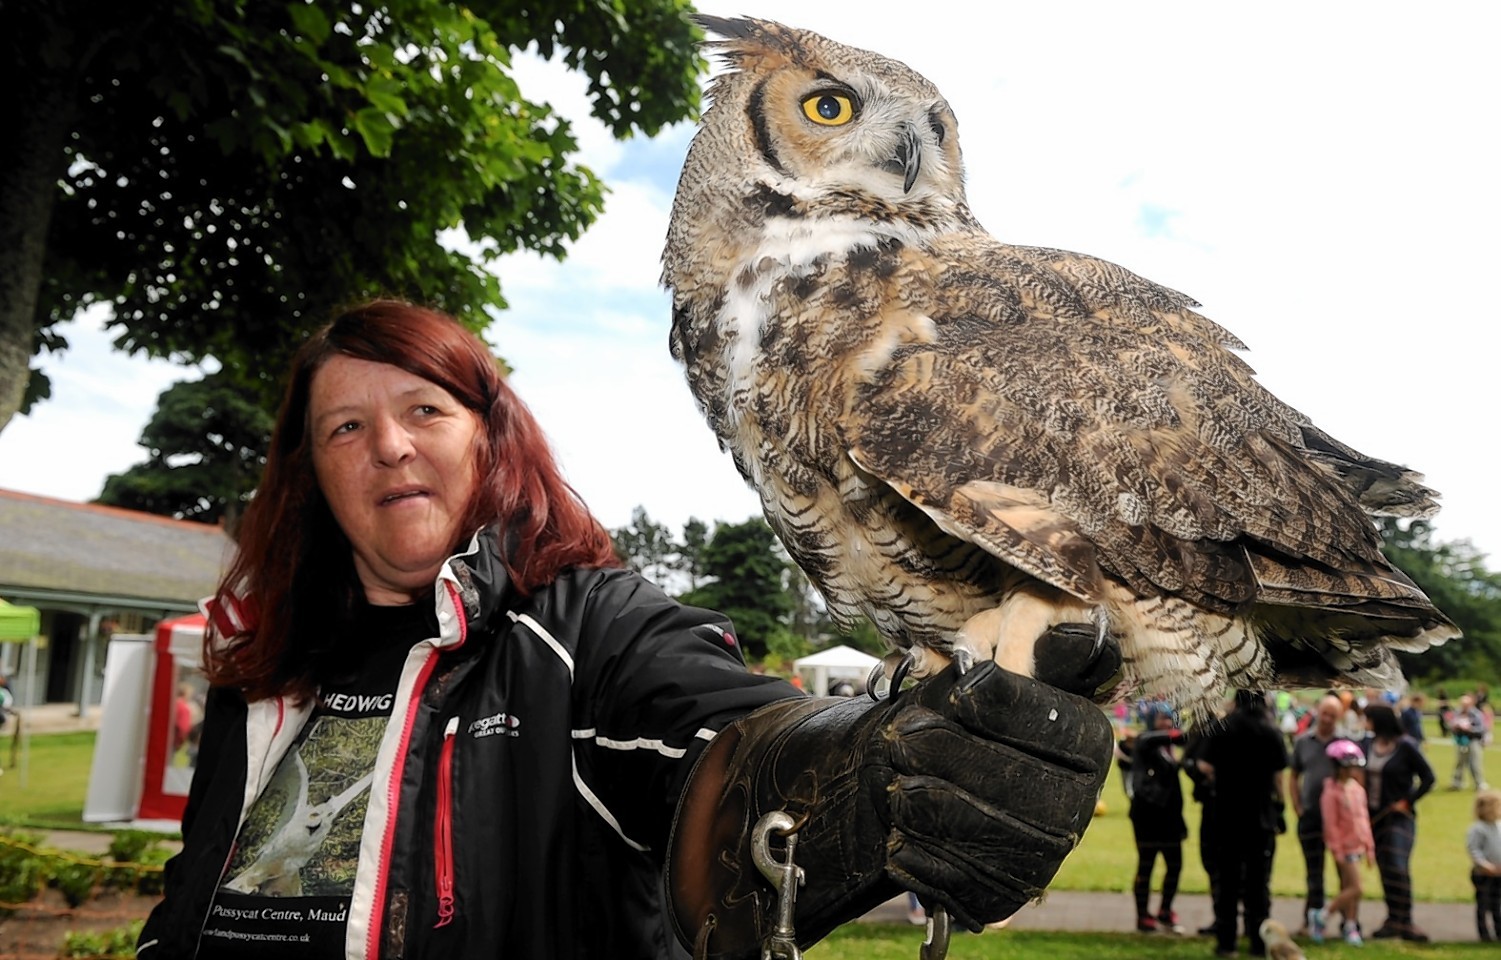 nviroment Day held at Duthie Park on Sunday the 19th july. Pictured is Ruth Hicking from the Pussycat Centre near Maud with Errol who appeared in the Harry Potter films